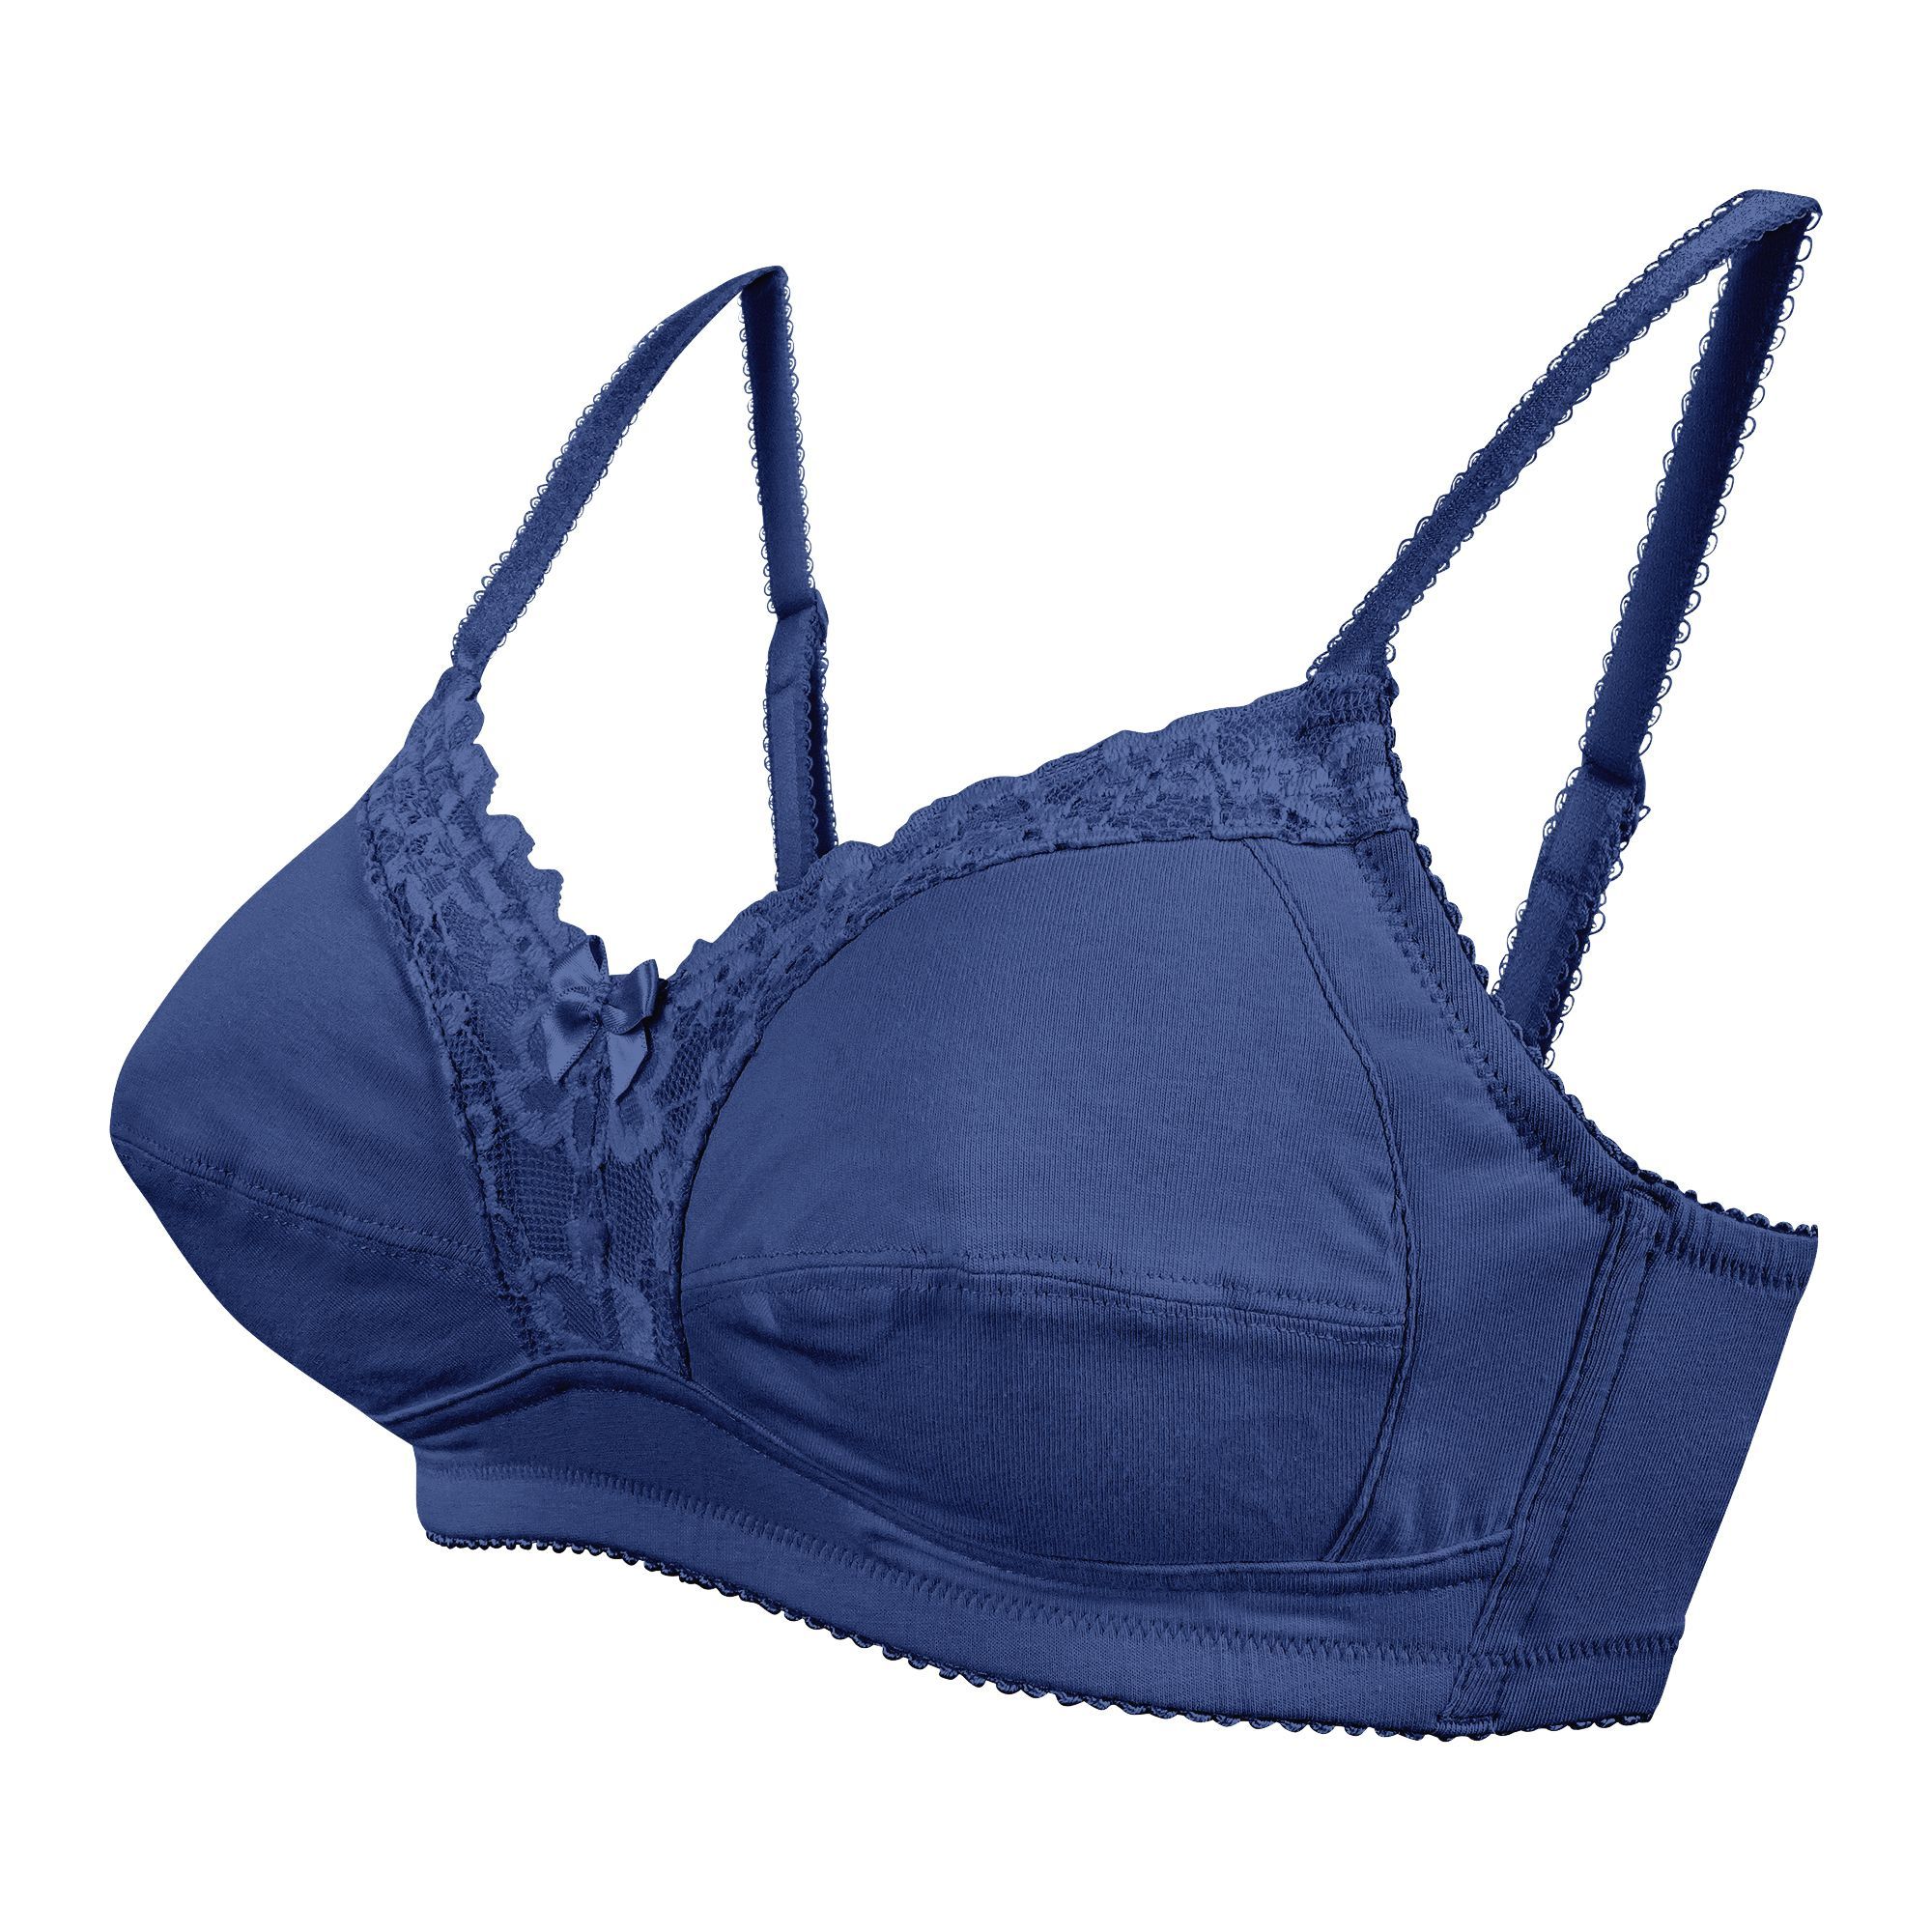 Hrms Collection - Preloved imported bra size 44C Price 250/200